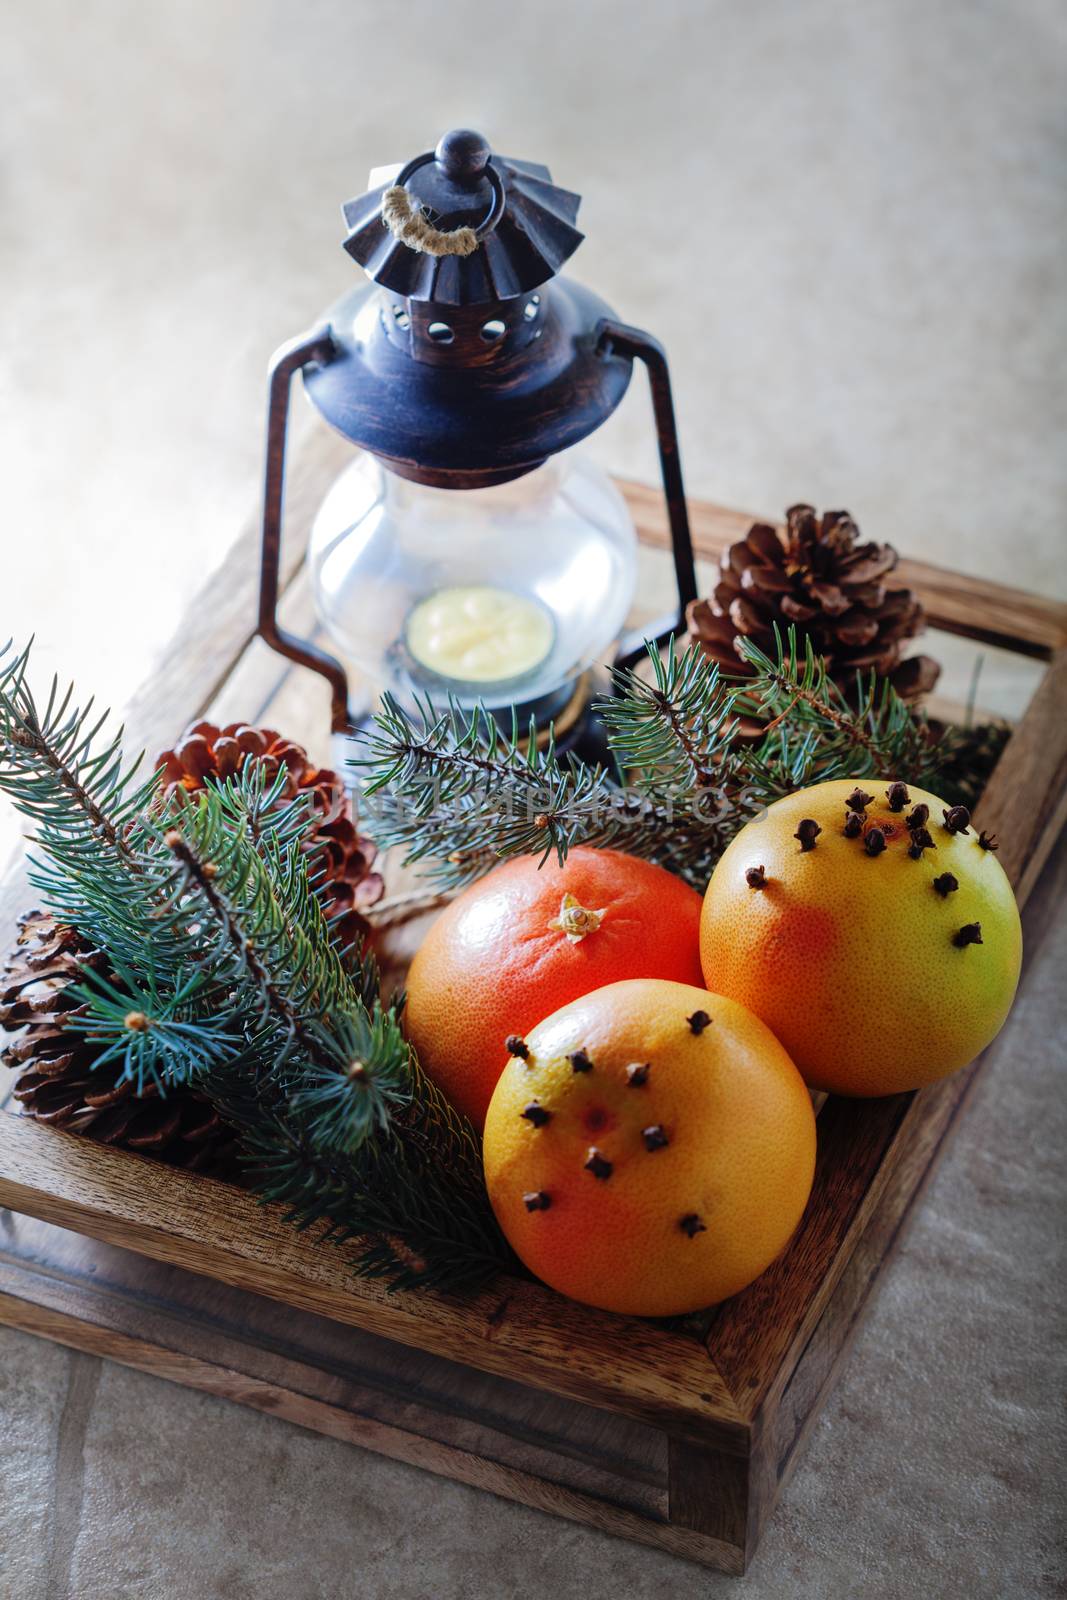 Christmas symbols including grapefruits in wooden box